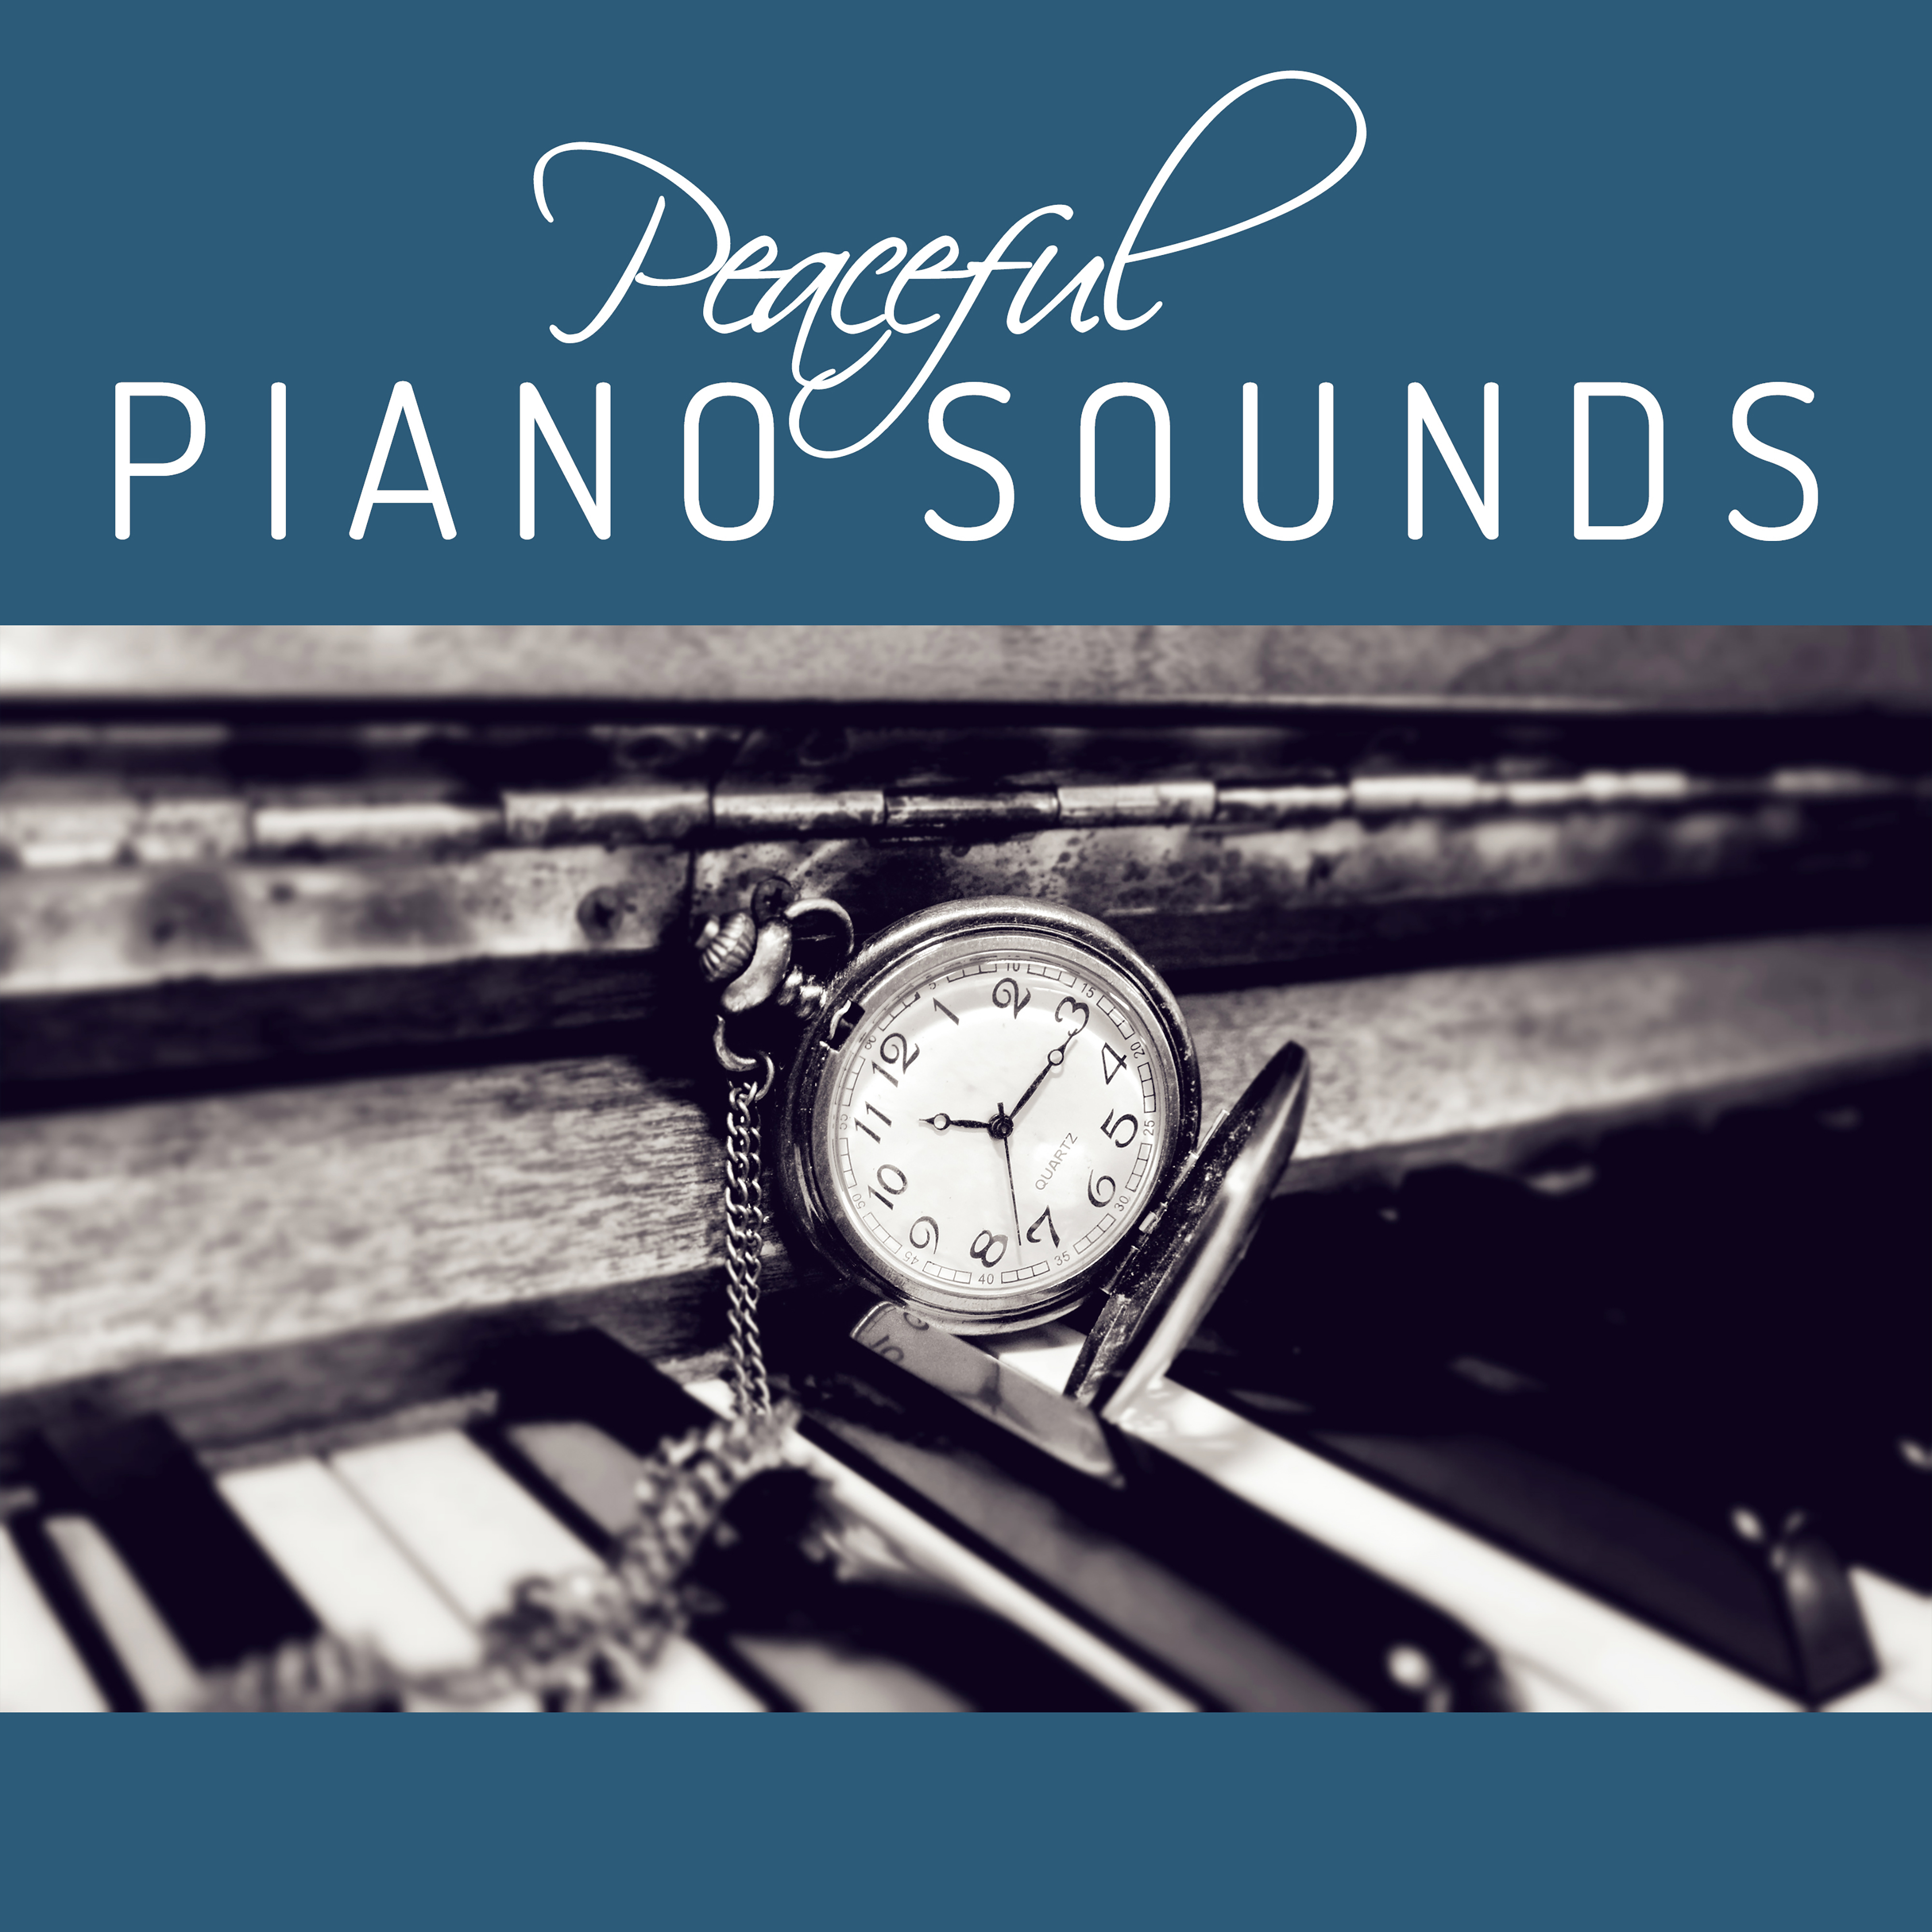 Peaceful Piano Sounds – Music for Relx Time, Calming Piano Sounds, Instrumental Jazz, Easy Listening Music